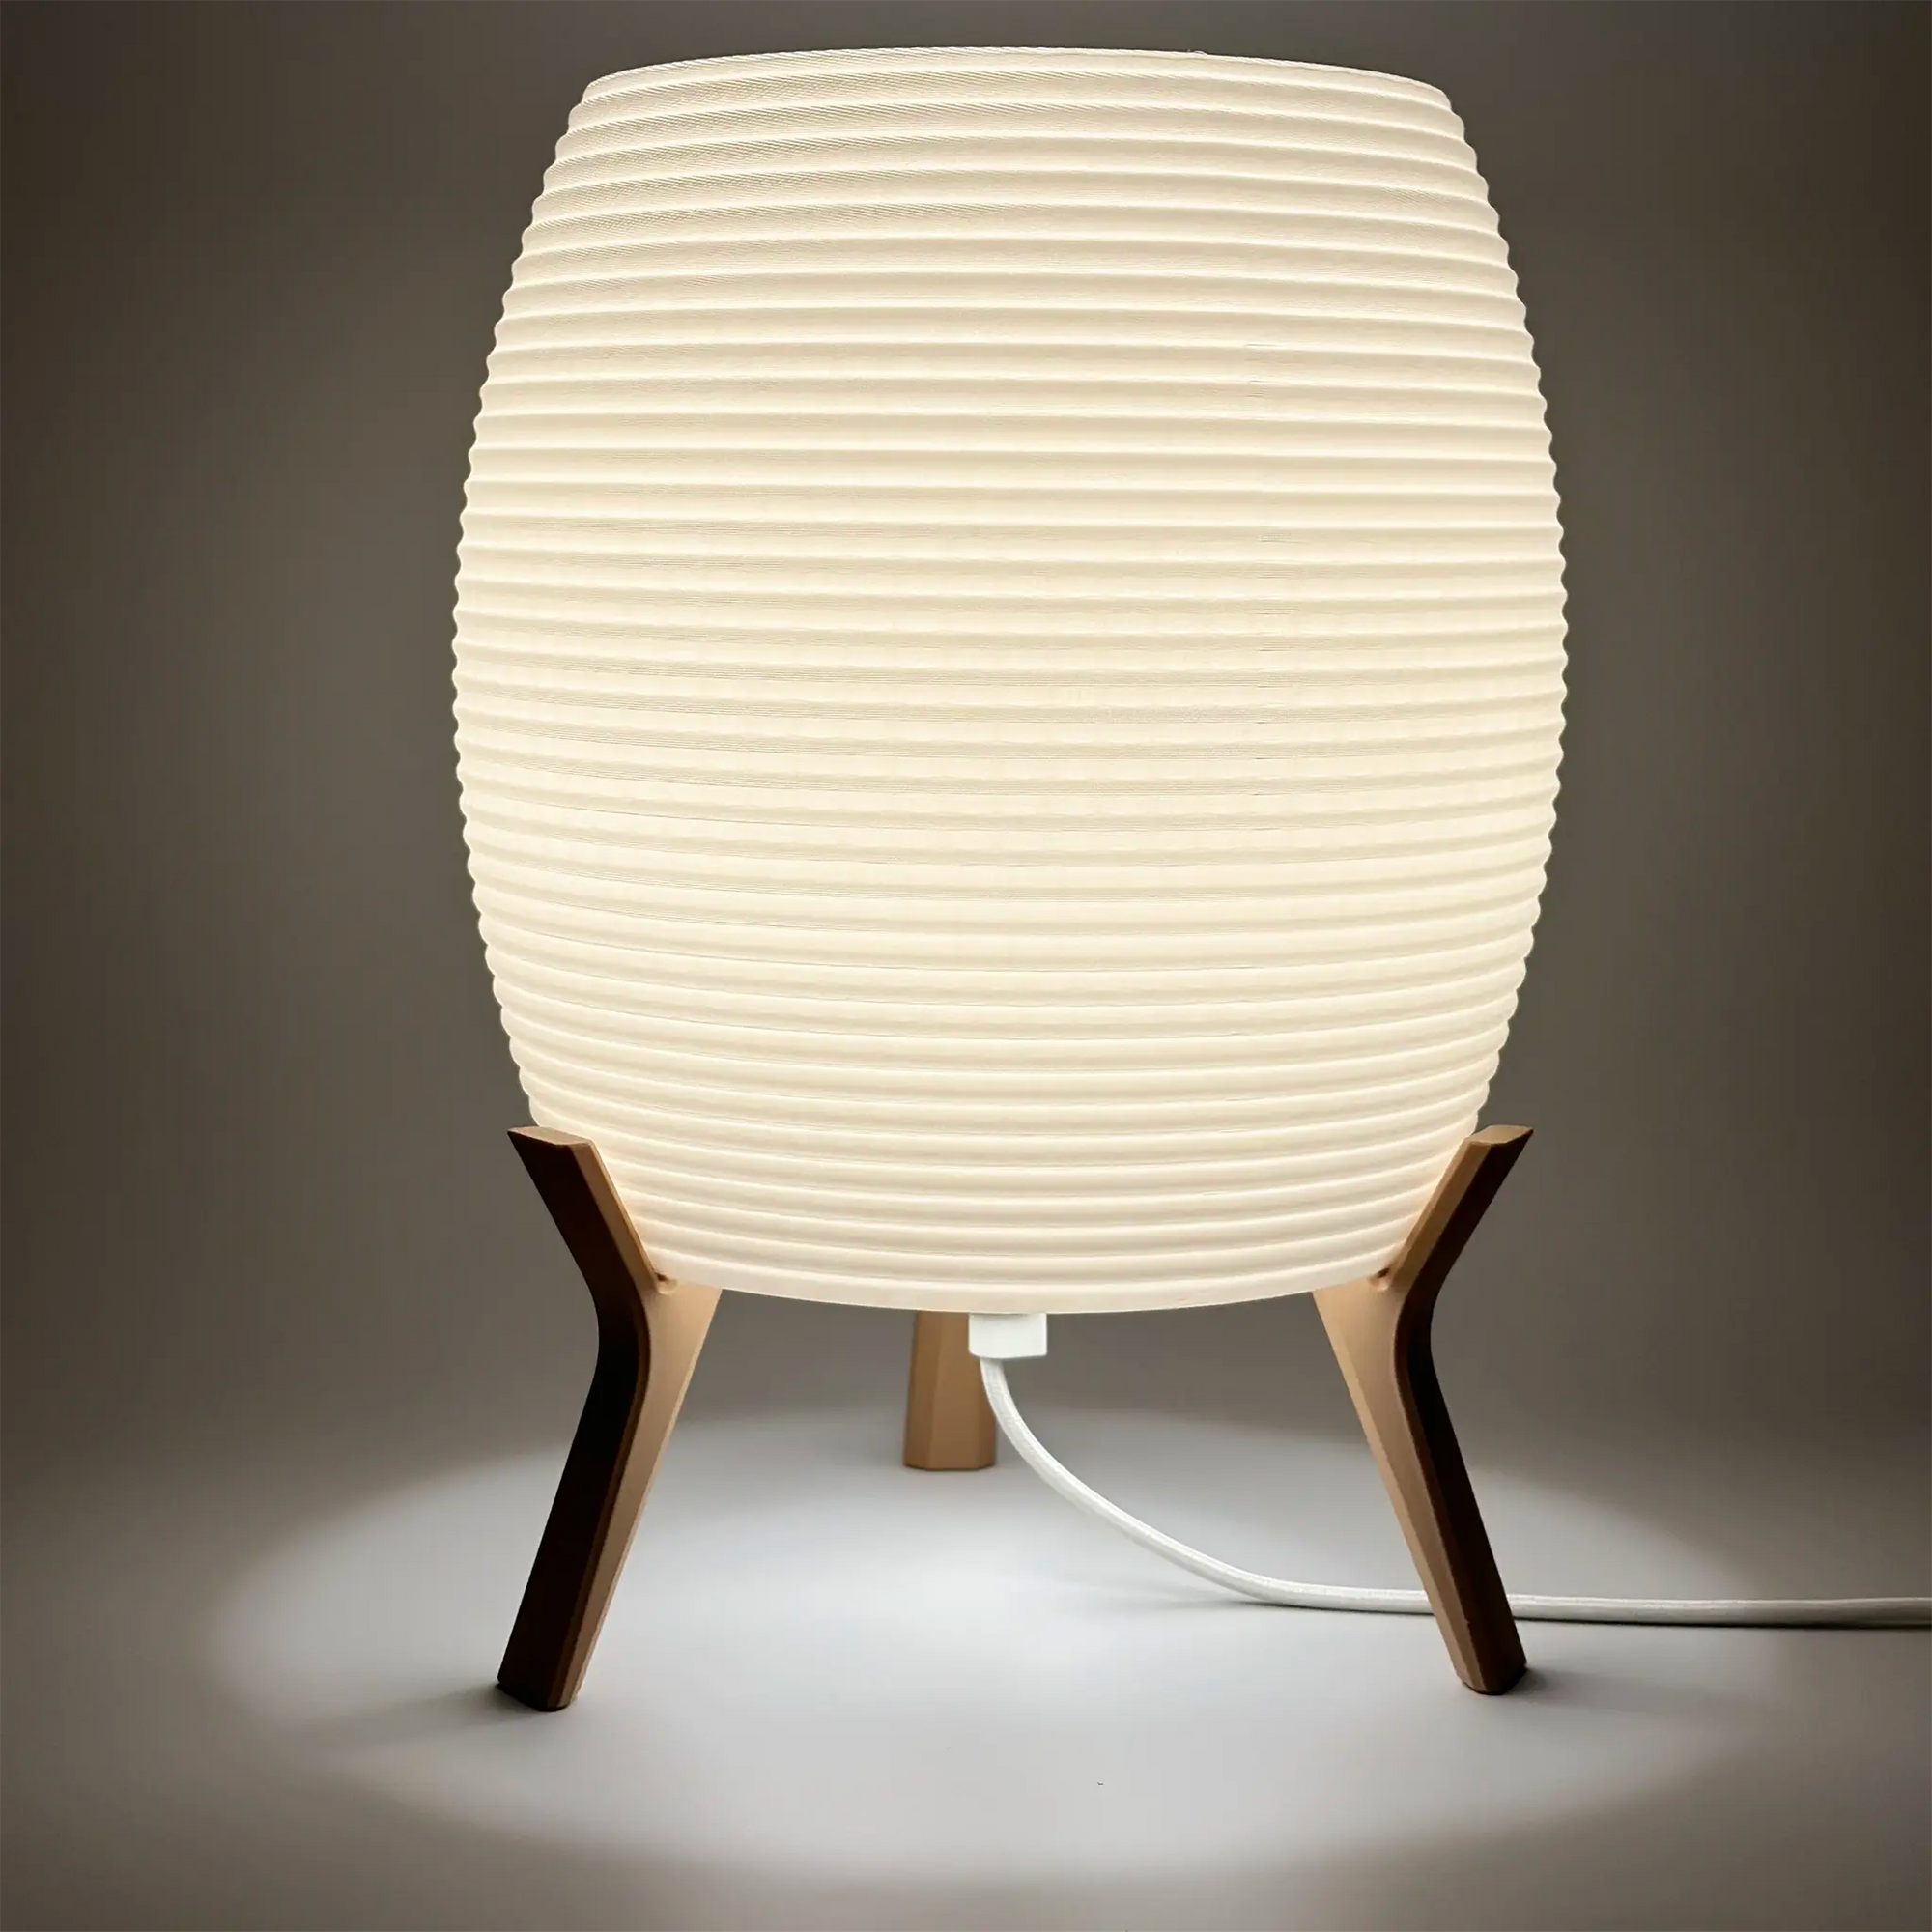 MinimalElegance Curve Table Lamp - Minimalist Bedside lamp in cotton white shade and wood brown base. Lamp is turned on with 3000k LED bulb.